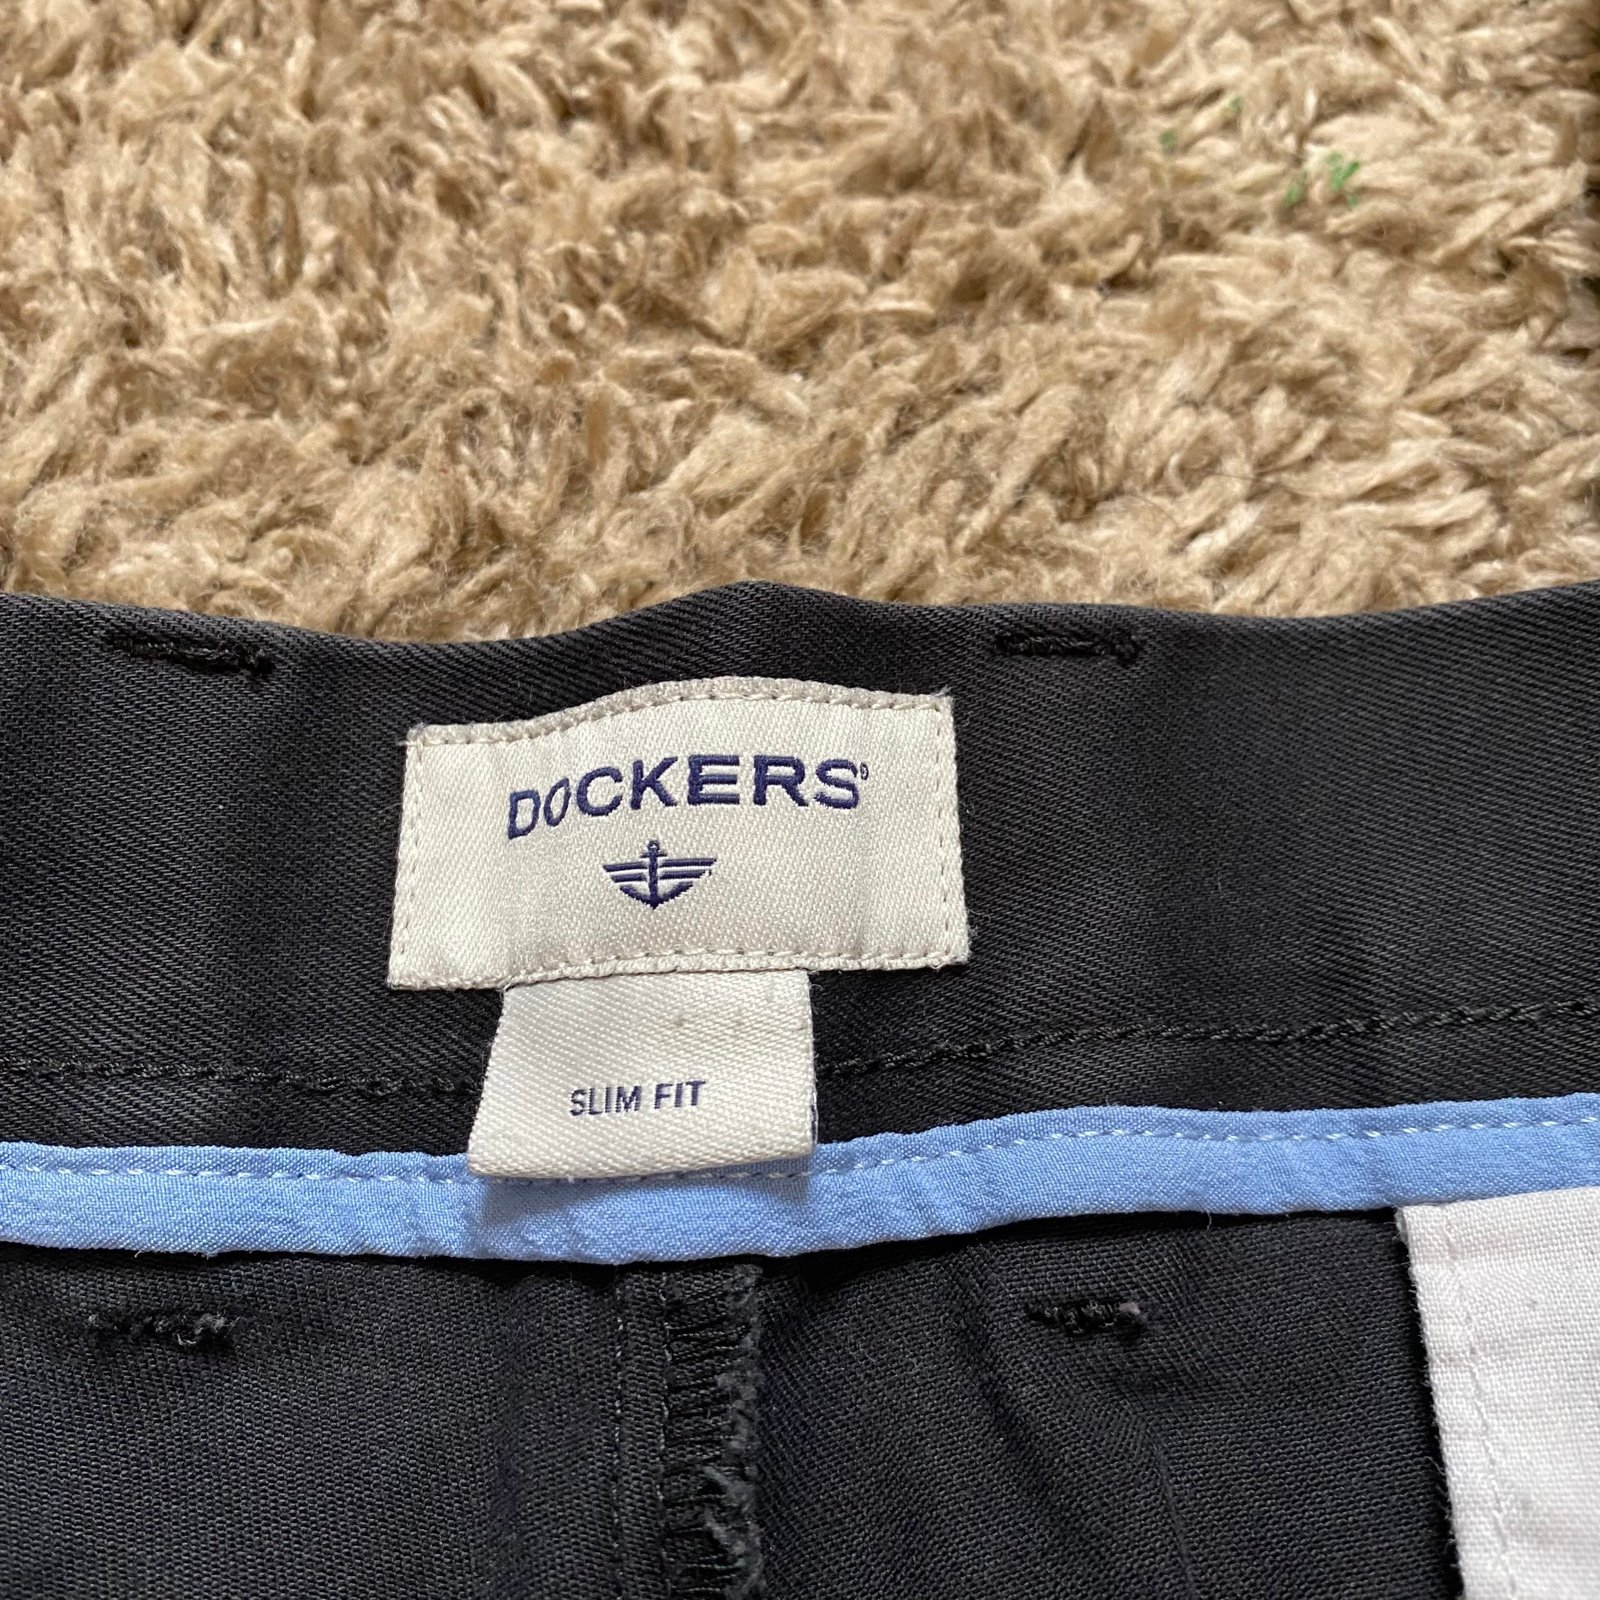 cheapest place to buy  Dockers pants o7fkLOIl4 online store